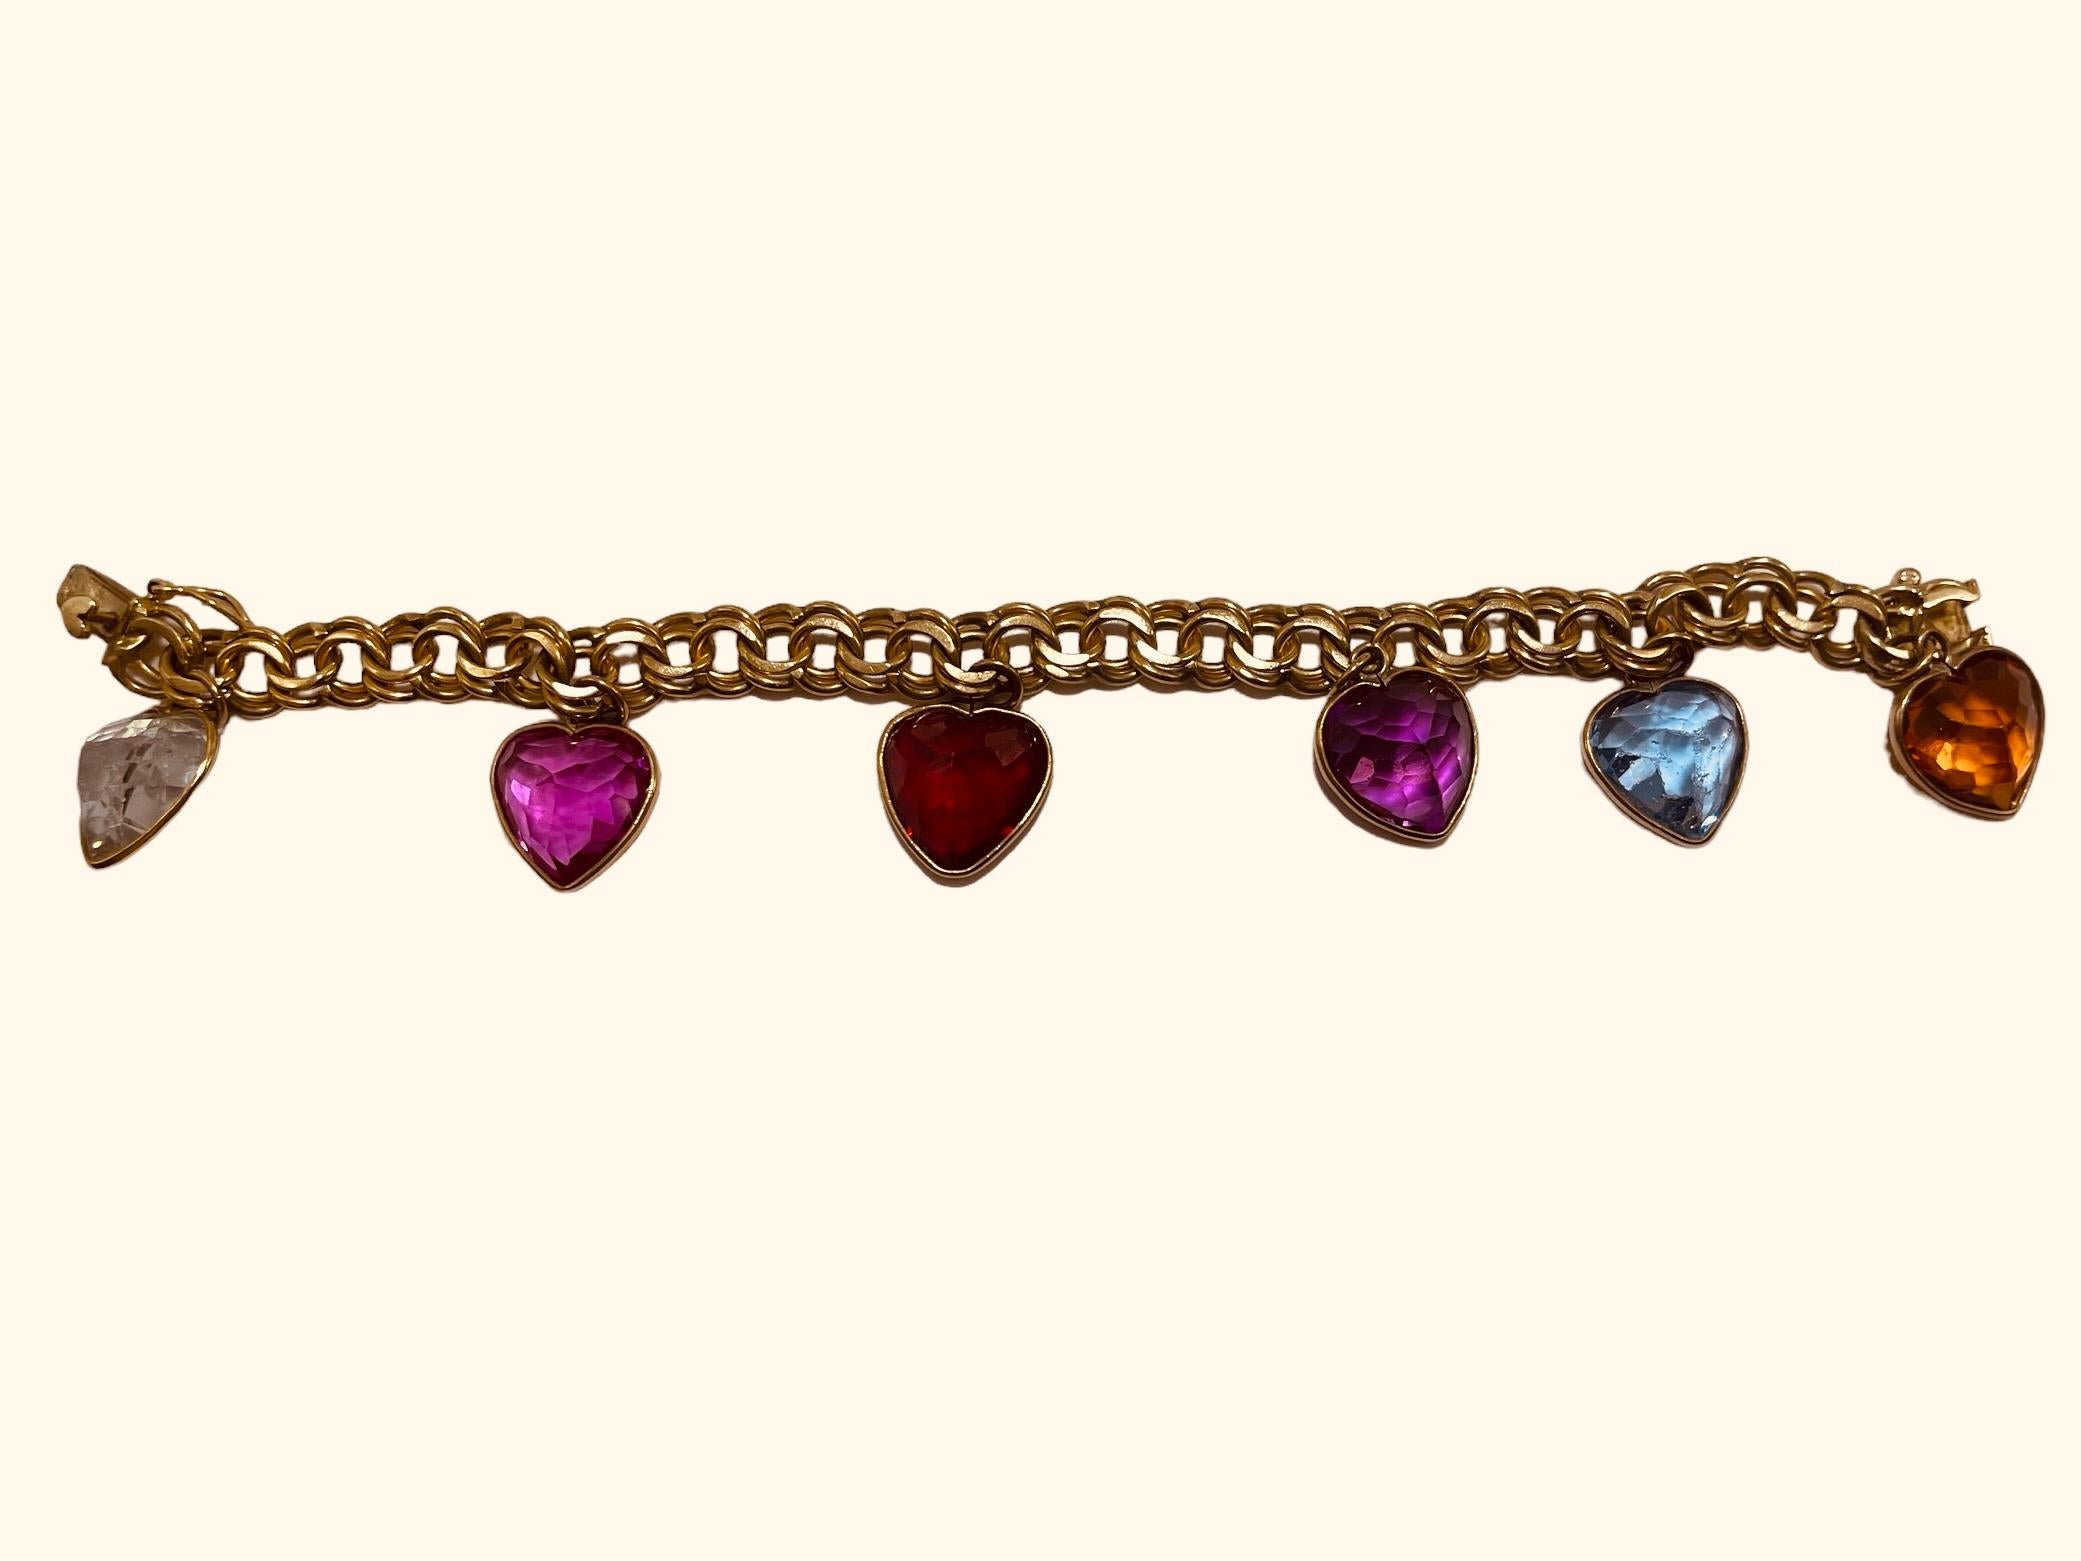 This is a 14K yellow gold Open Chino Link bracelet with charms. It depicts double rings link bracelet with seven puffy Zircon stone hearts charms framed in gold. The colors of the hearts are light green, pink, red, purple, light blue and